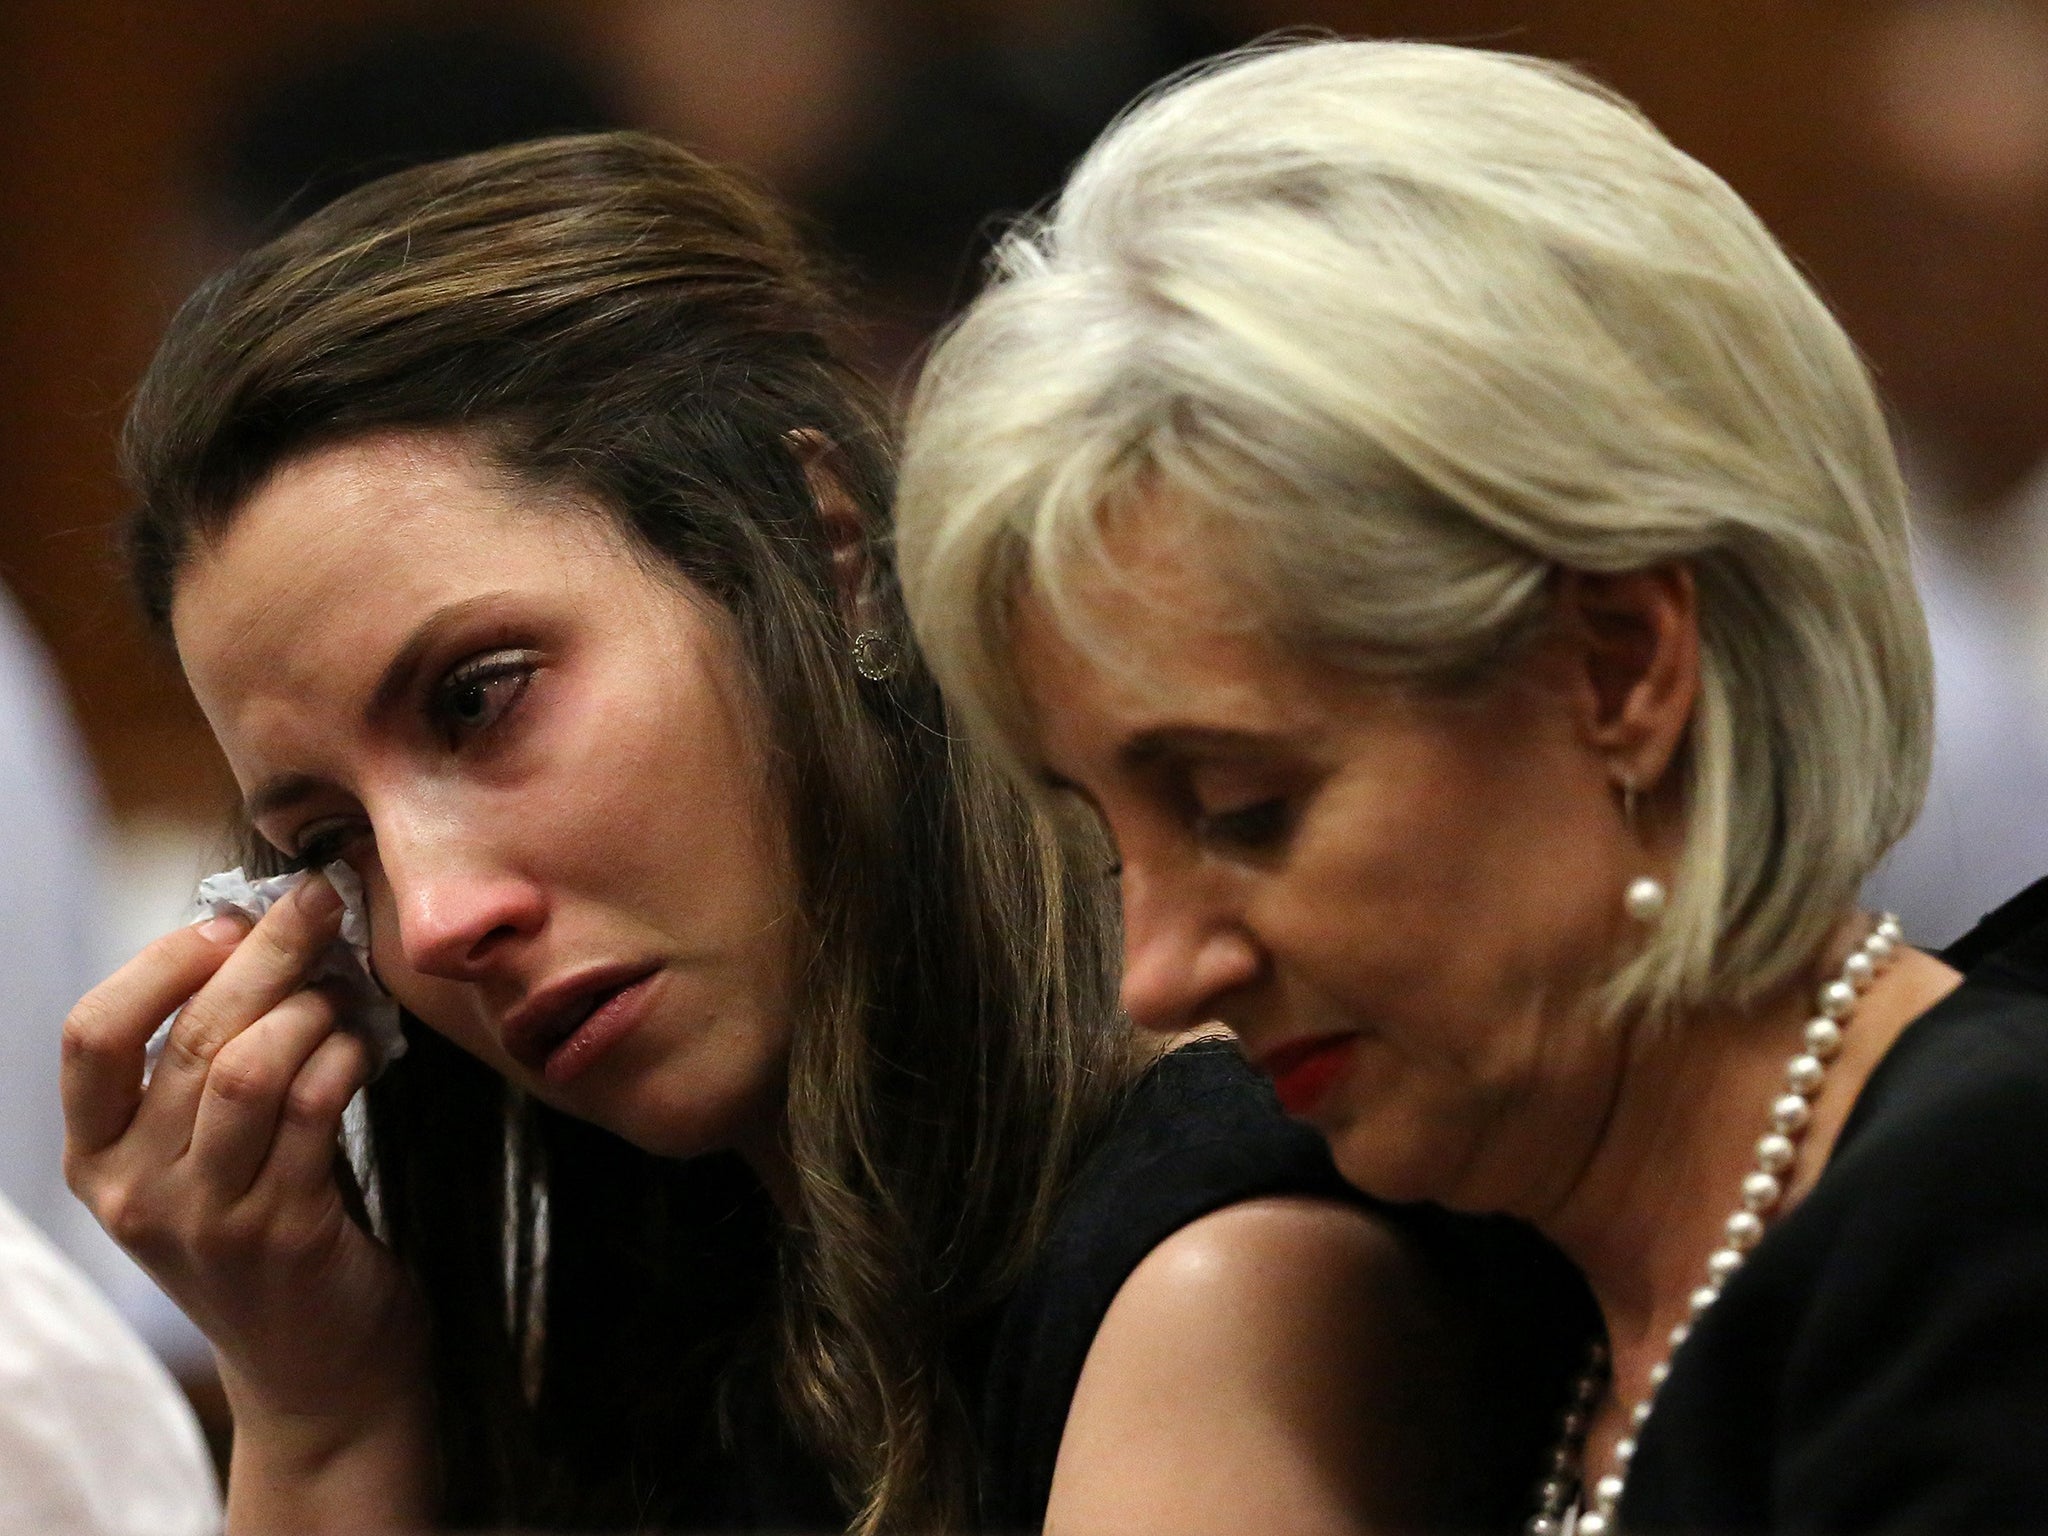 The sister of Oscar Pistorius, Aimee (L), sits next to her aunt Lois during his sentencing hearing at the North Gauteng High Court in Pretoria